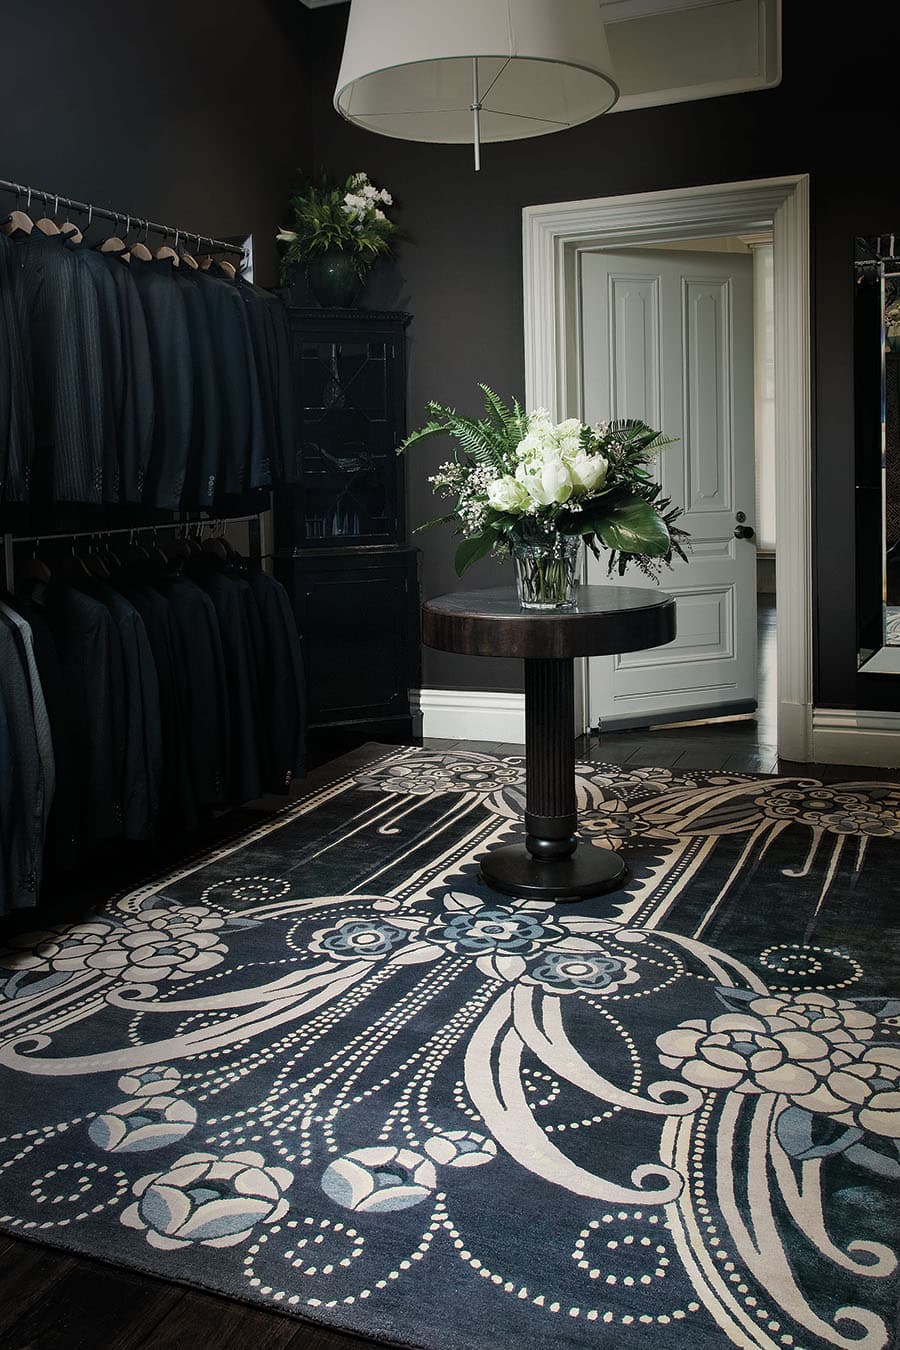 bold and designer silk carpet, luxurious room decor, centre table placed in the centre with a flower vase on it